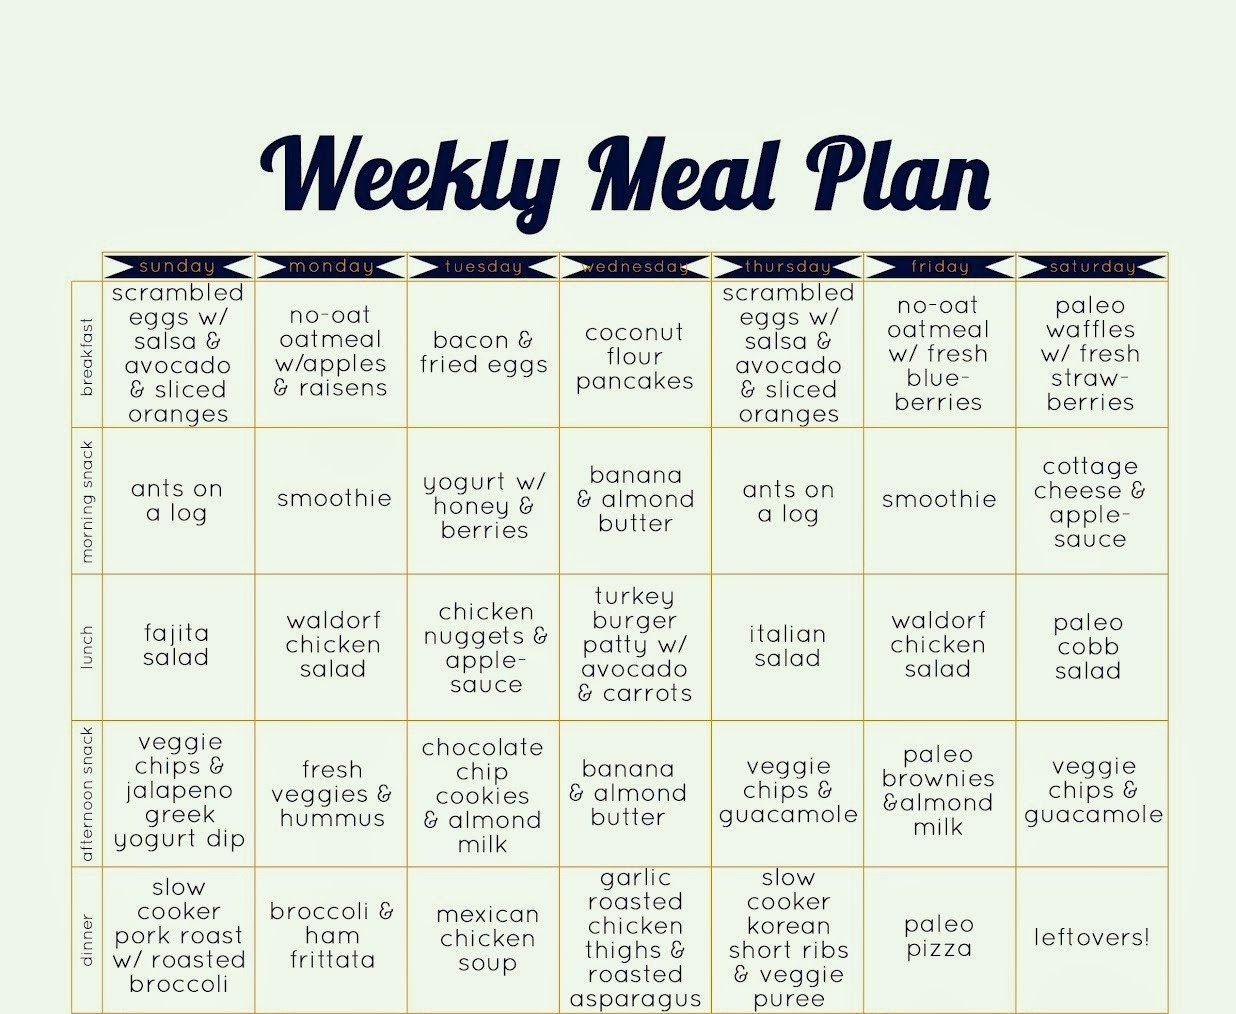 Free Paleo Diet Plan
 Looking for an ideal paleo t meal plan The Paleo